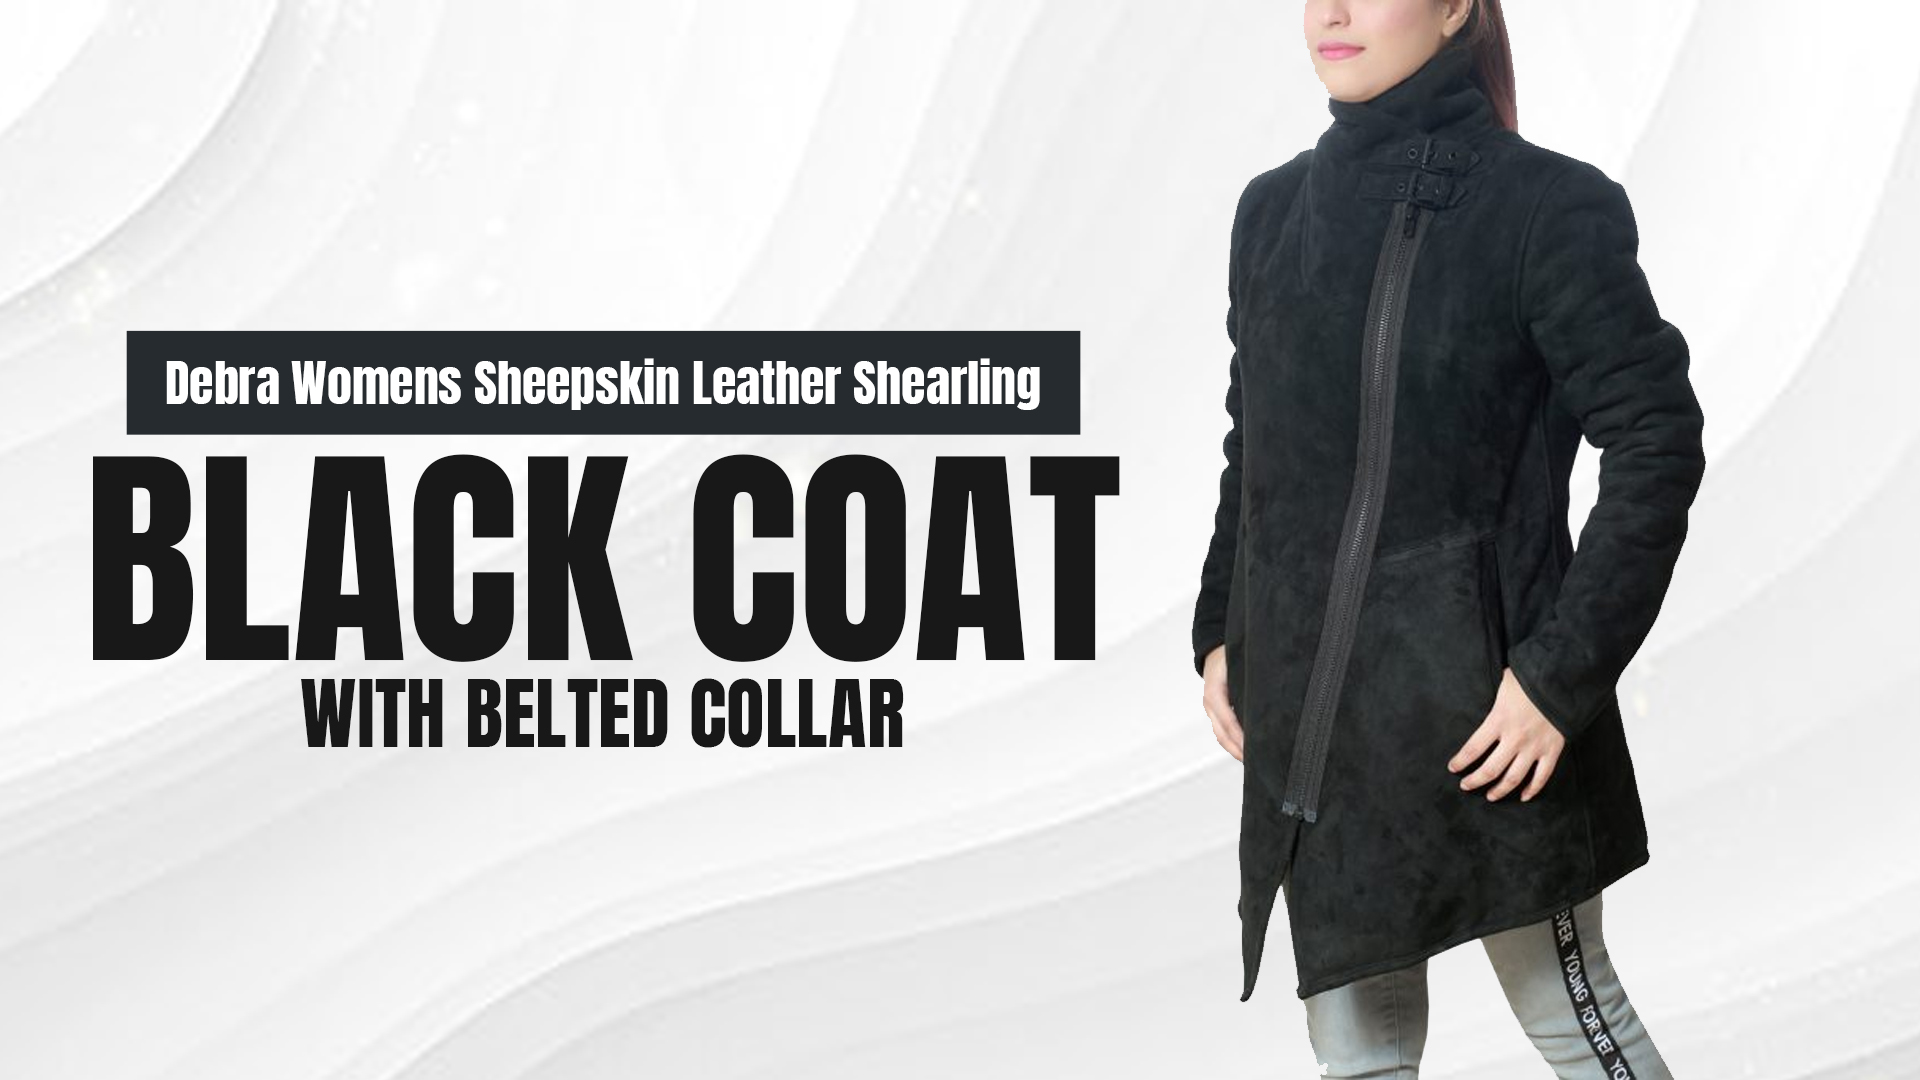 Debra Womens Sheepskin Leather Shearling Black Coat with Belted Collar